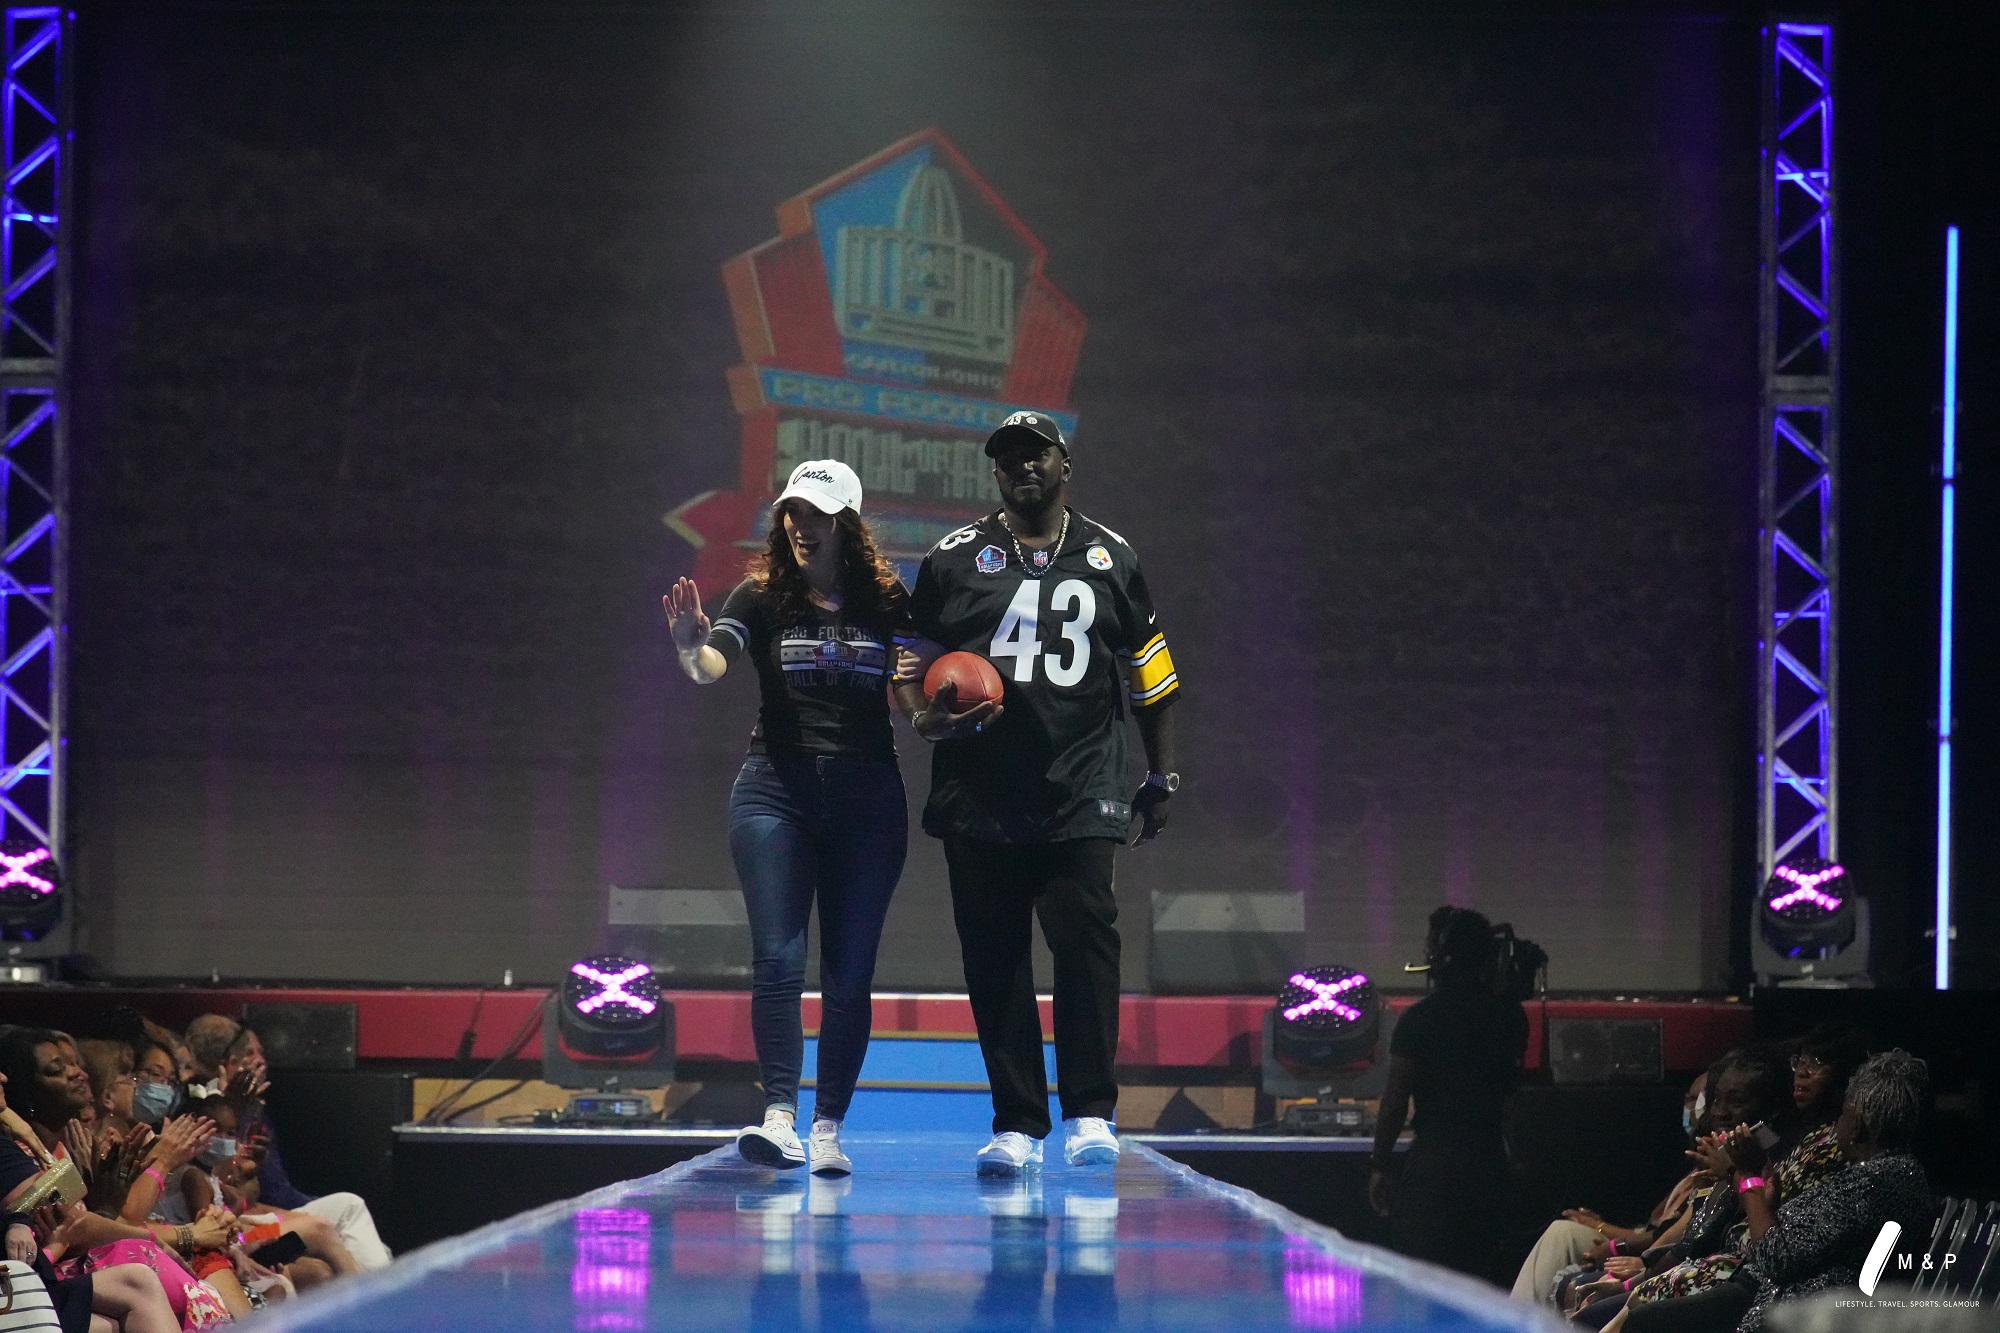 Hall Of Fame Enshrinement Week HOF Fashion Show Continues Steelers